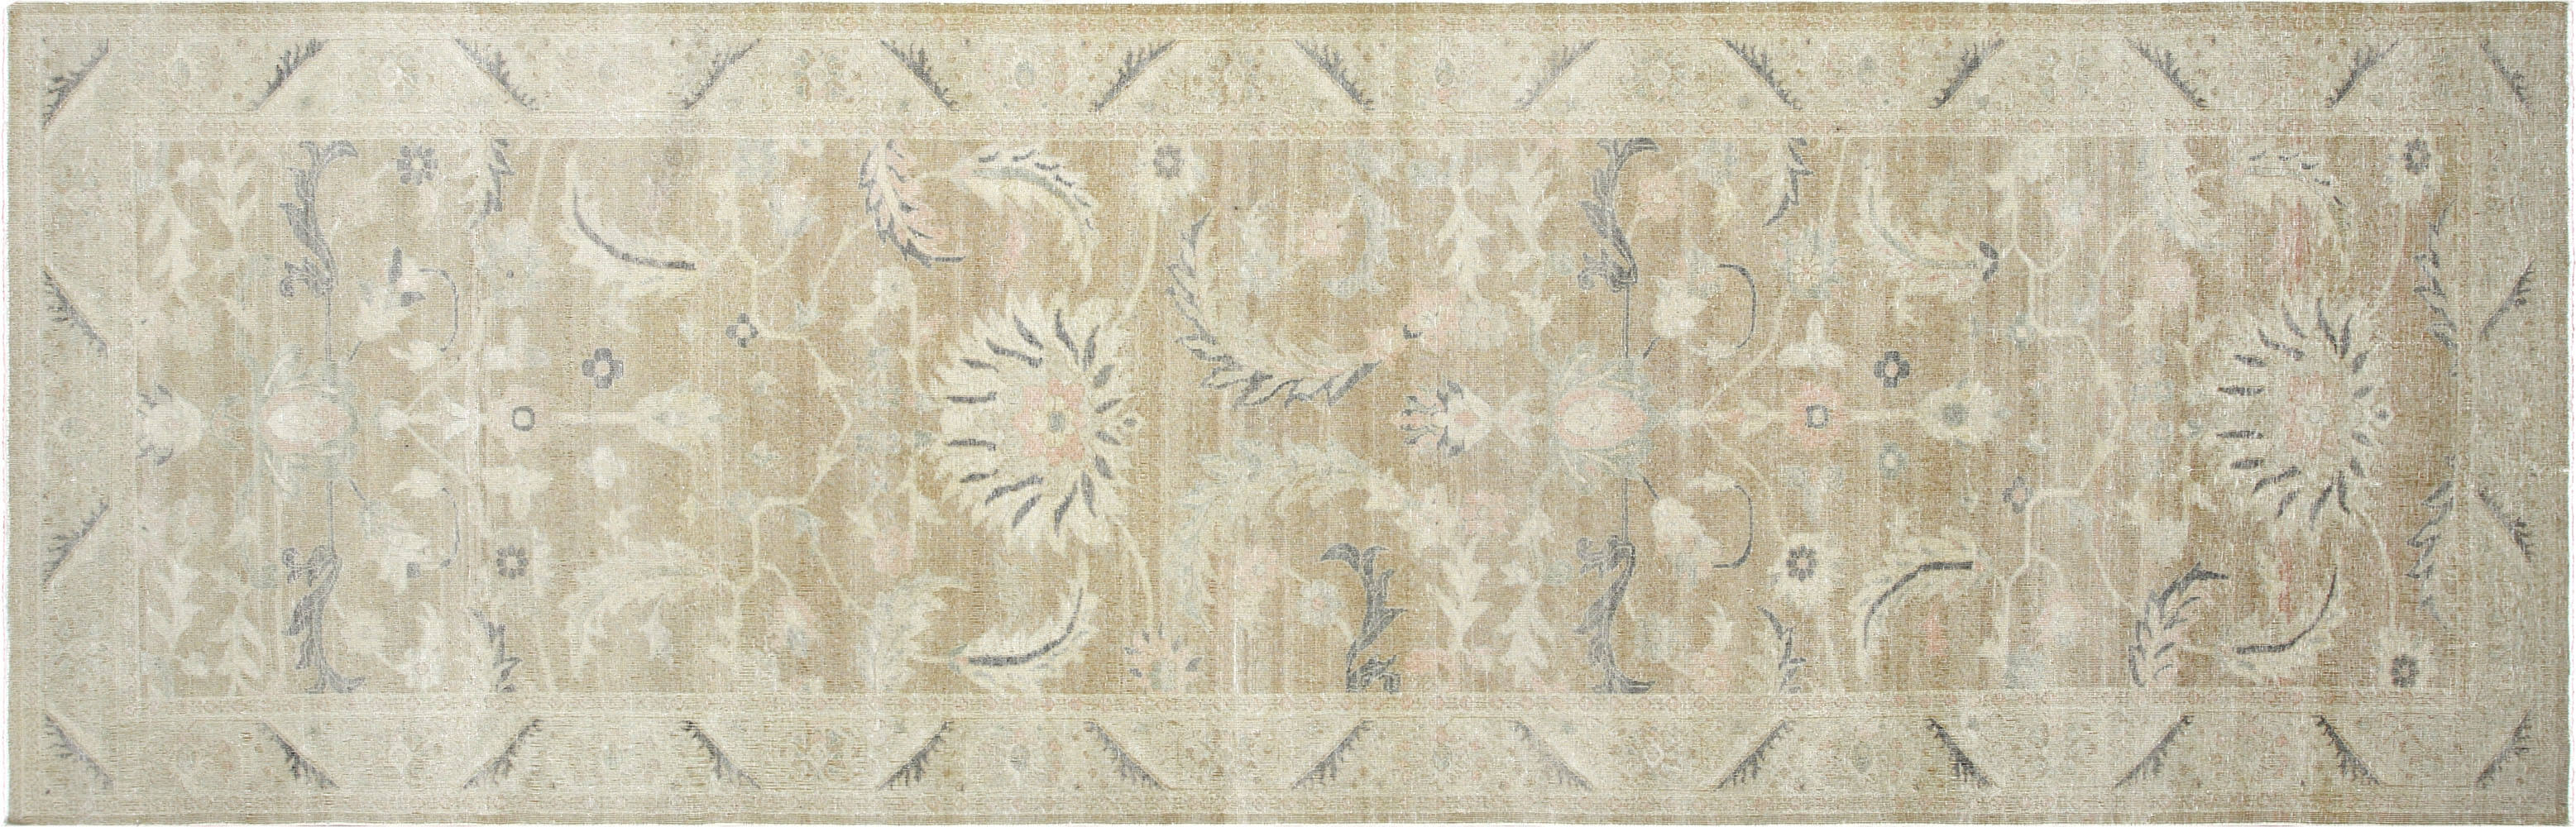 Recently Woven Egyptian Sultanabad Rug - 4'8" x 14'8"